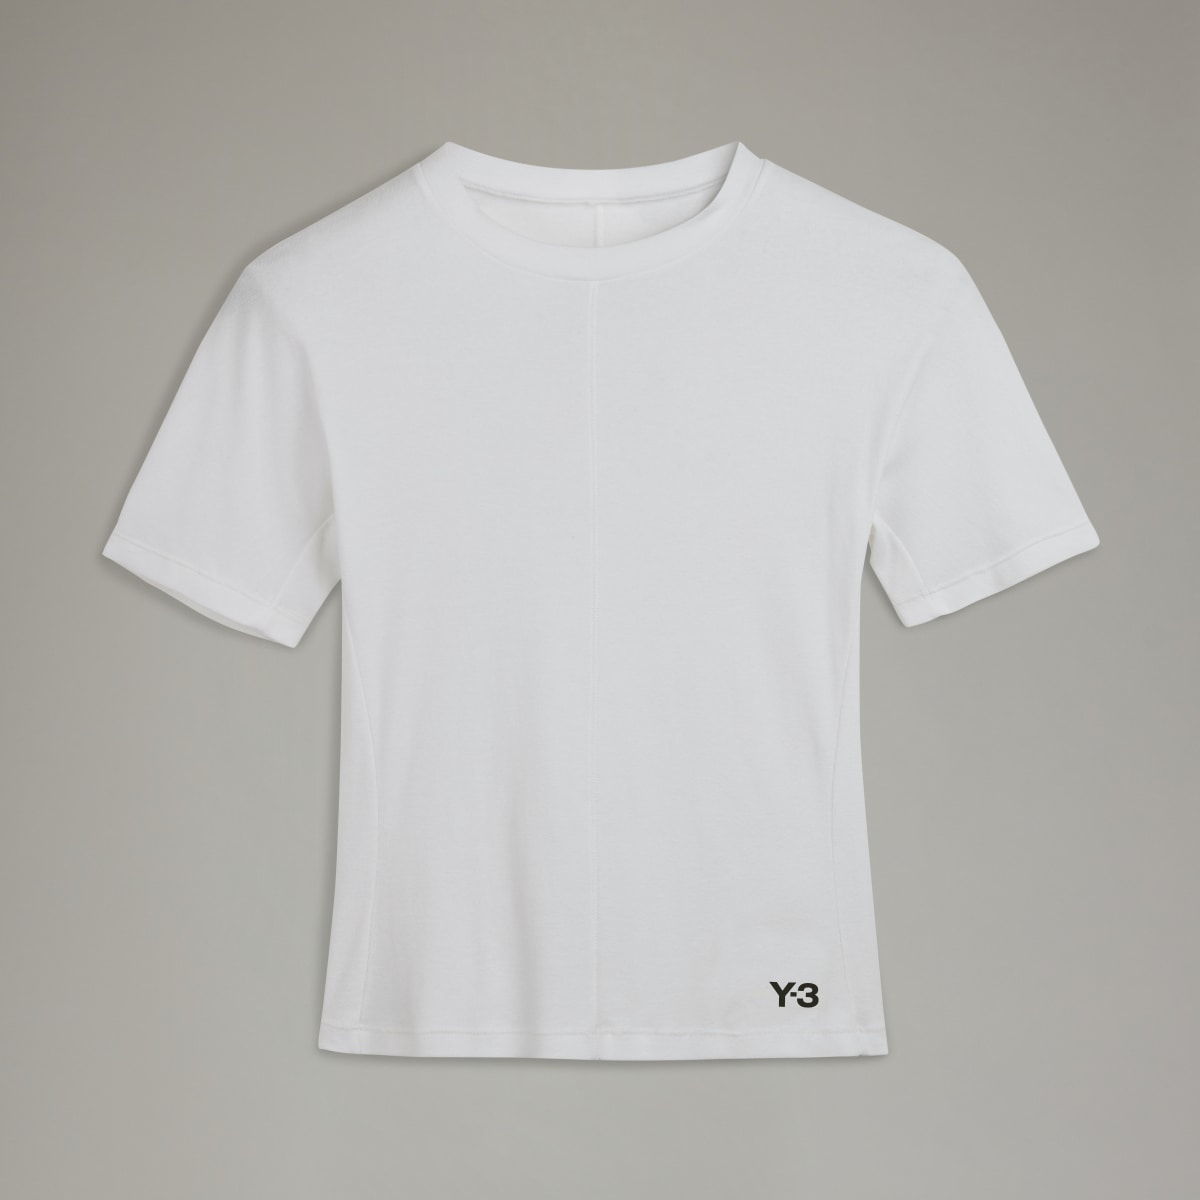 Adidas Y-3 Fitted T-Shirt. 5